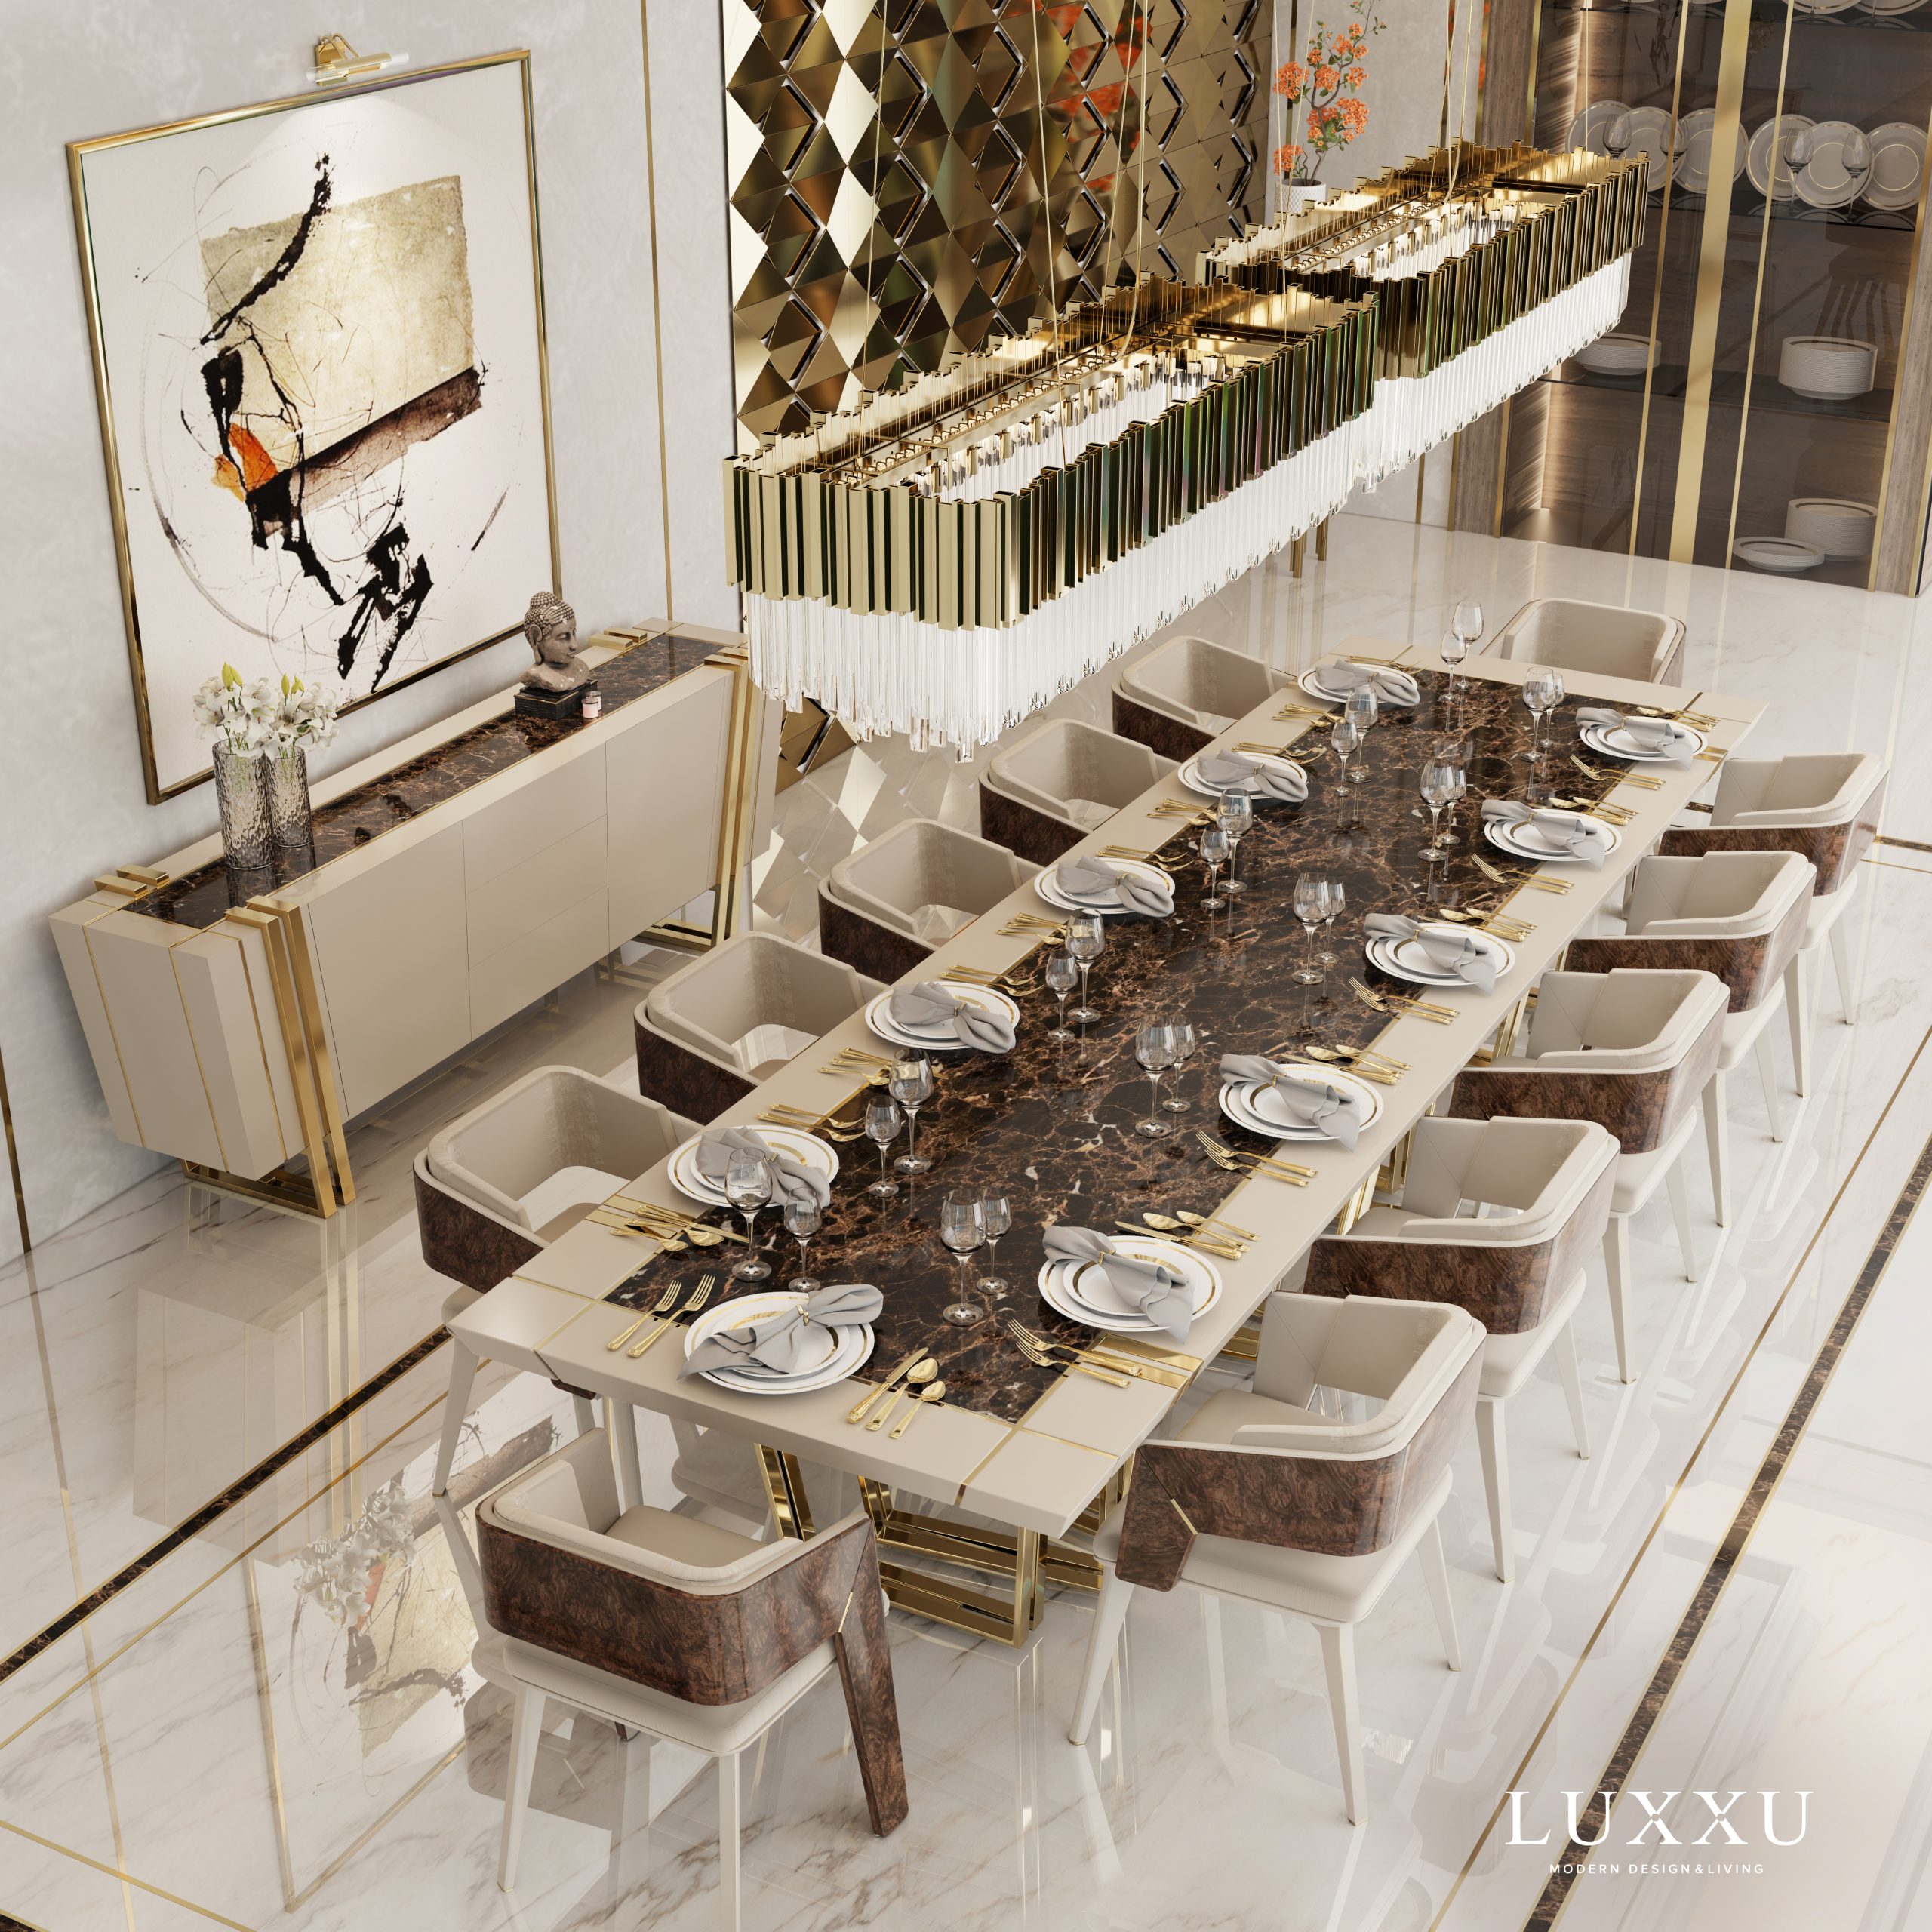 luxury houses are a symbol of luxxu's dining room